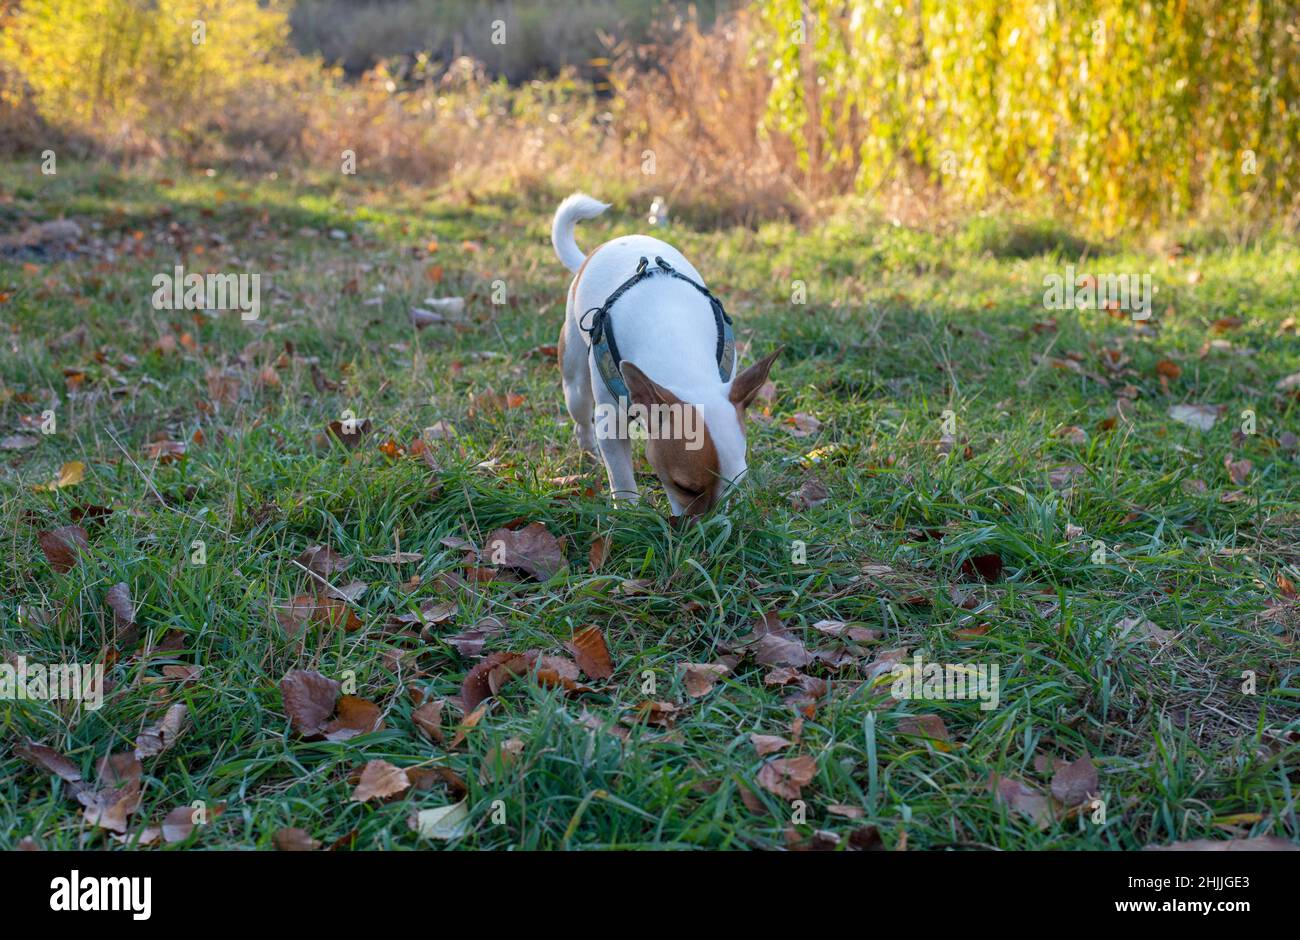 A dog of the Jack Russell Terrier breed stands in the green grass in autumn in the forest against the background of yellow trees with its head bowed a Stock Photo